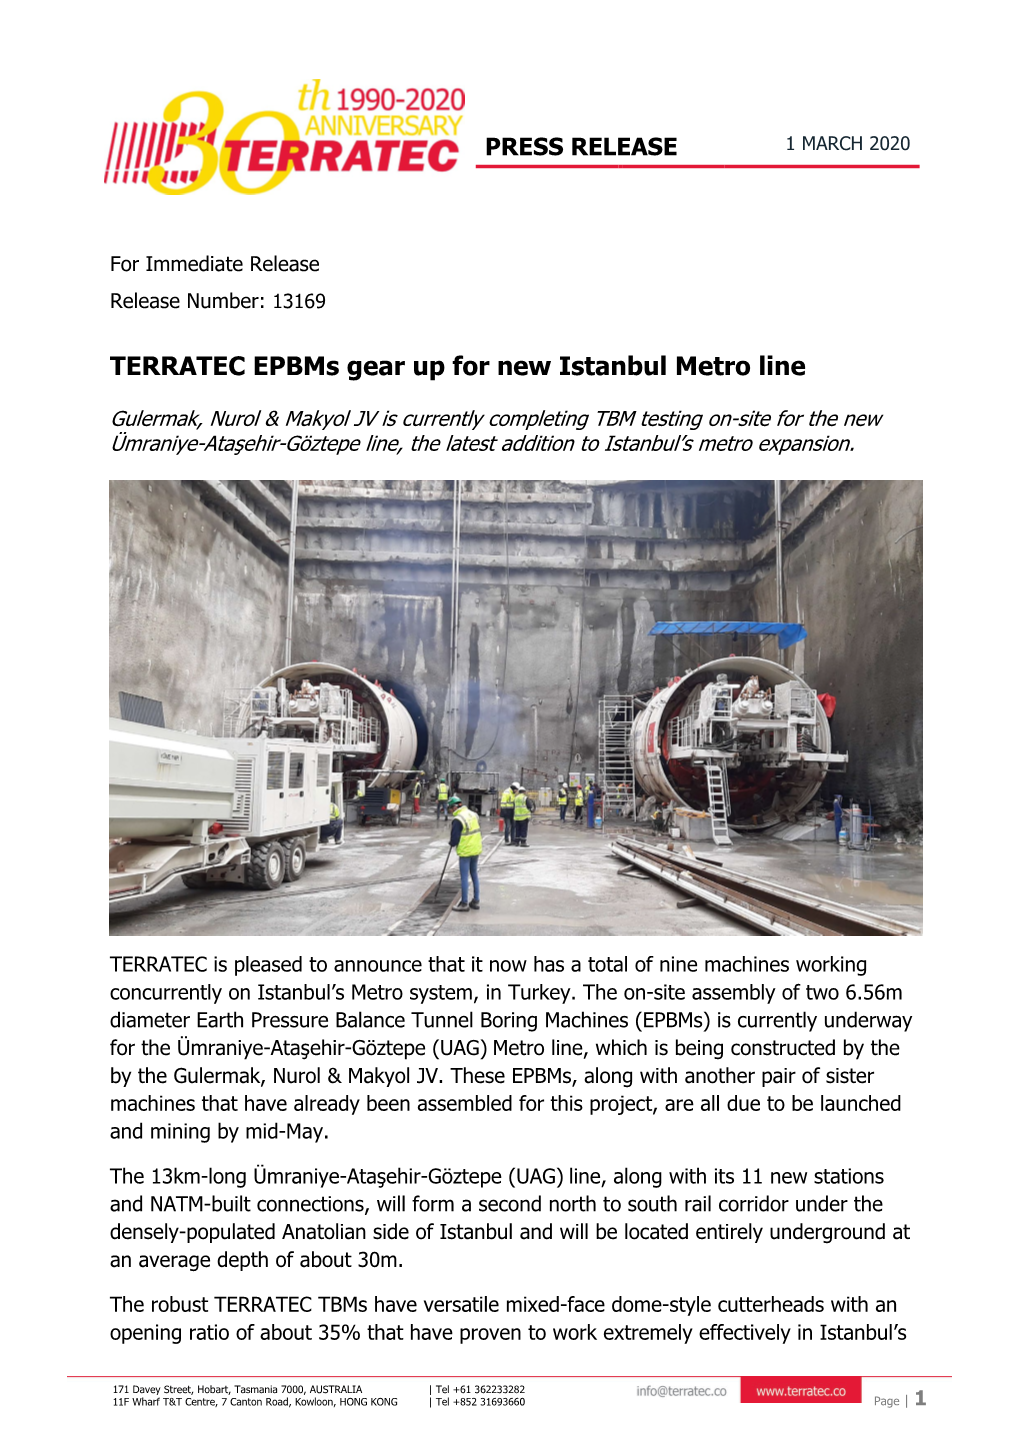 TERRATEC Epbms Gear up for New Istanbul Metro Line